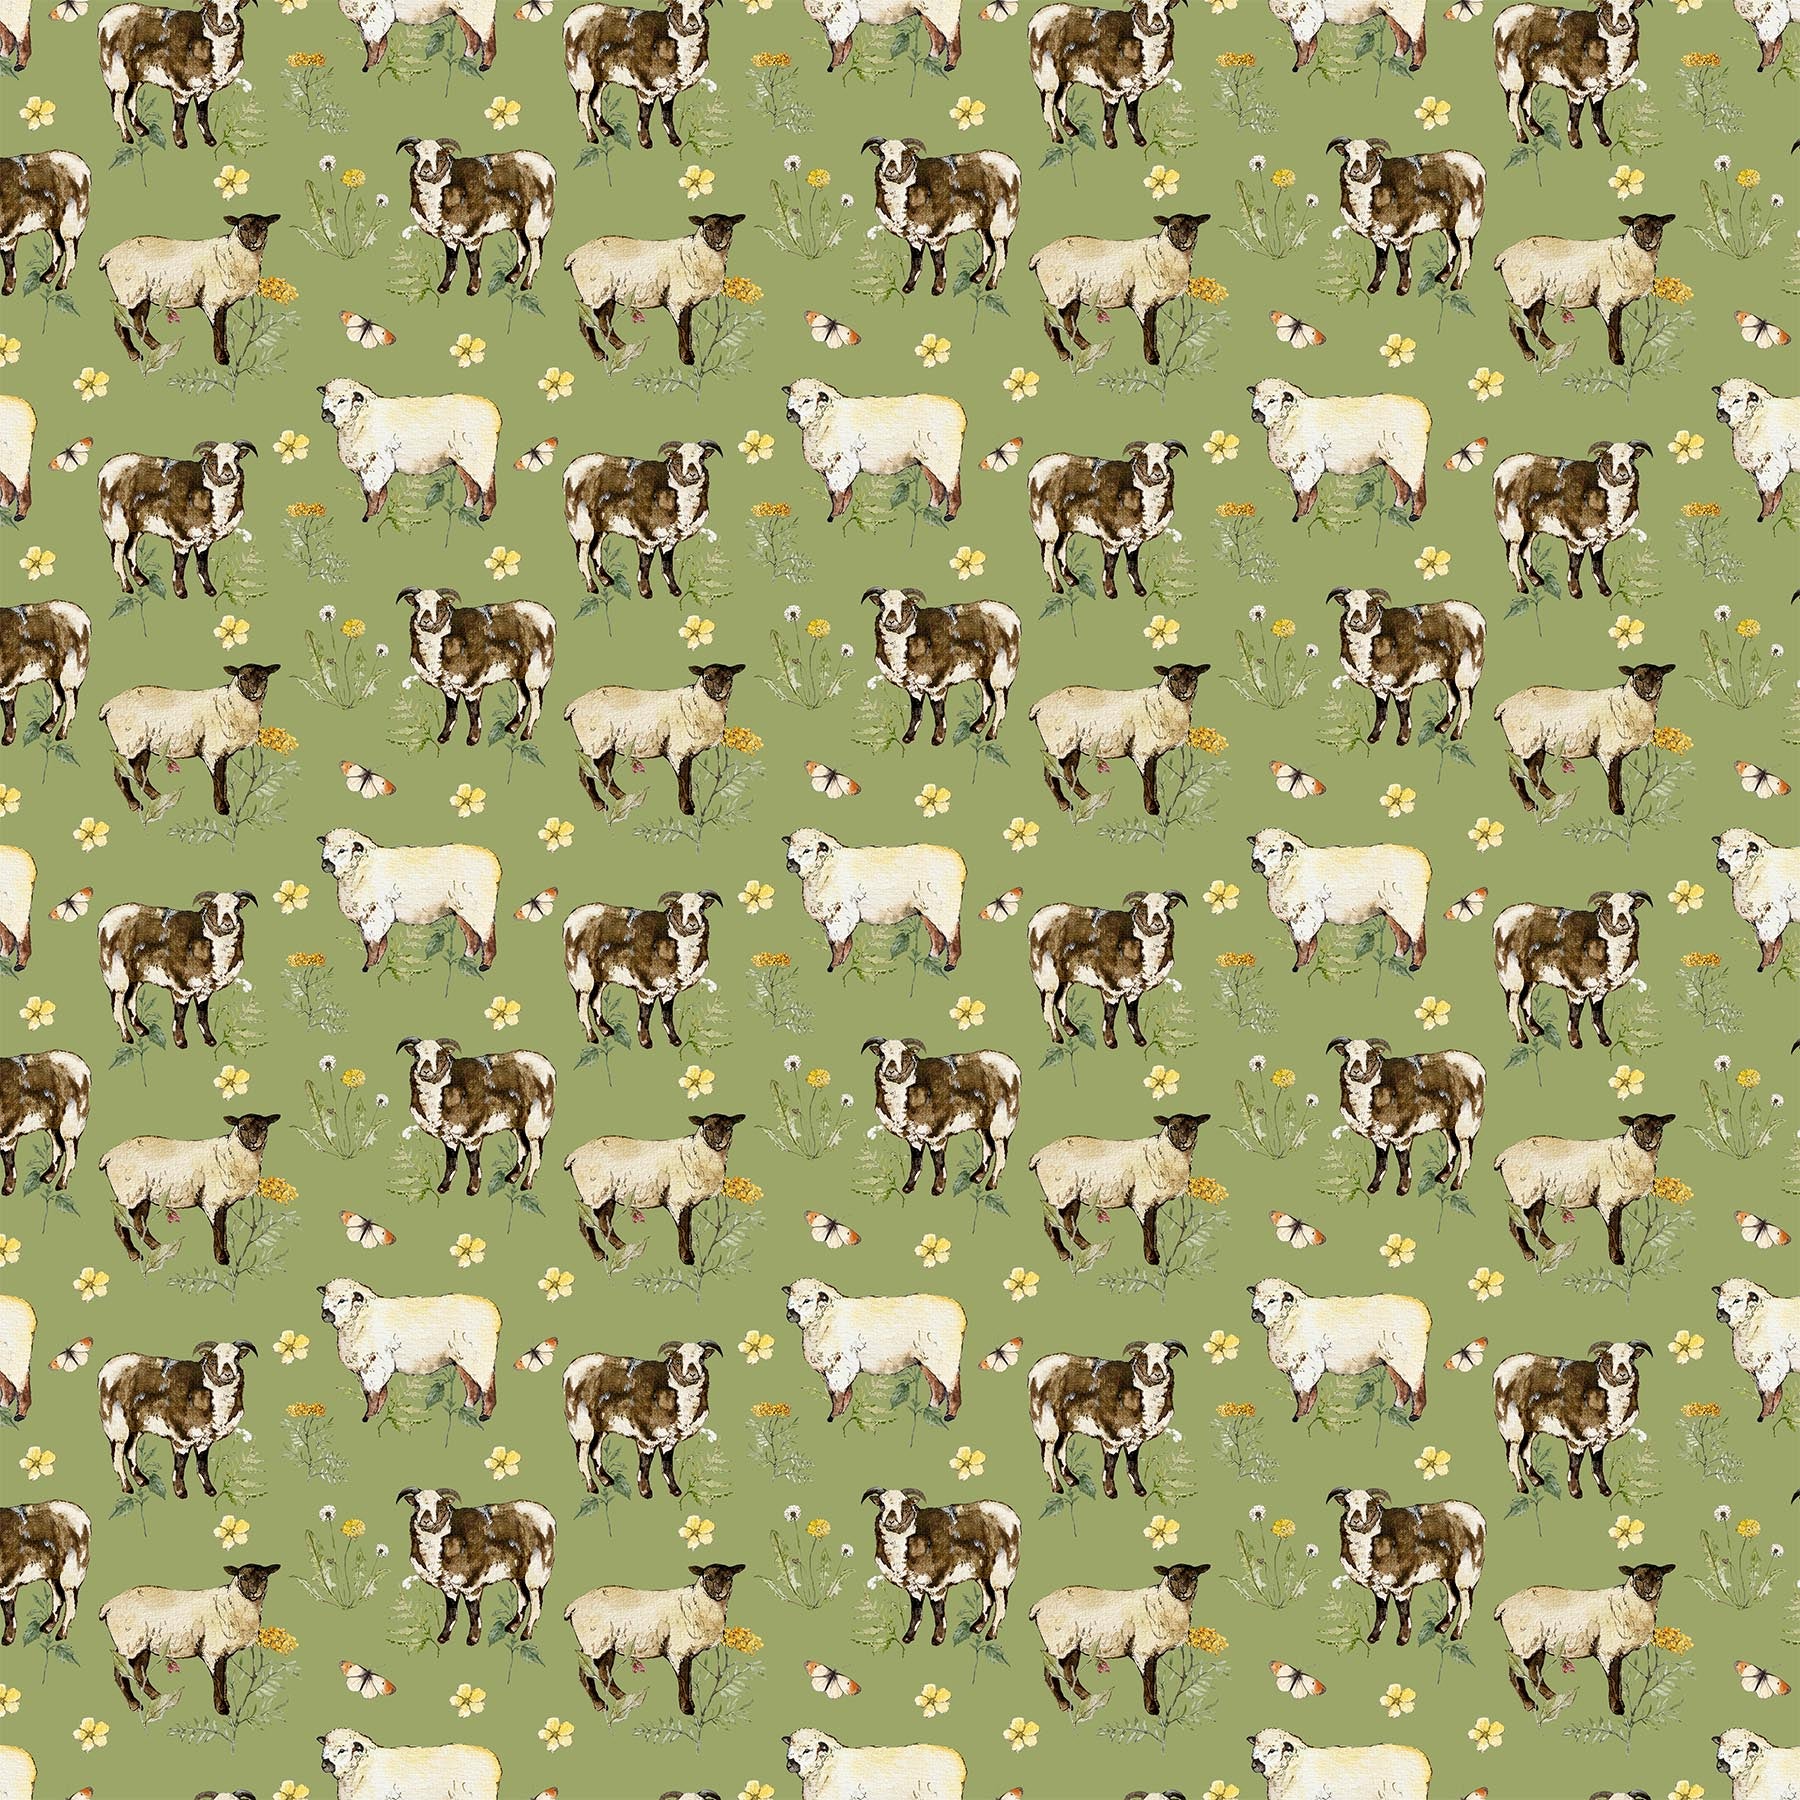 Countryside Comforts - Herd, Green